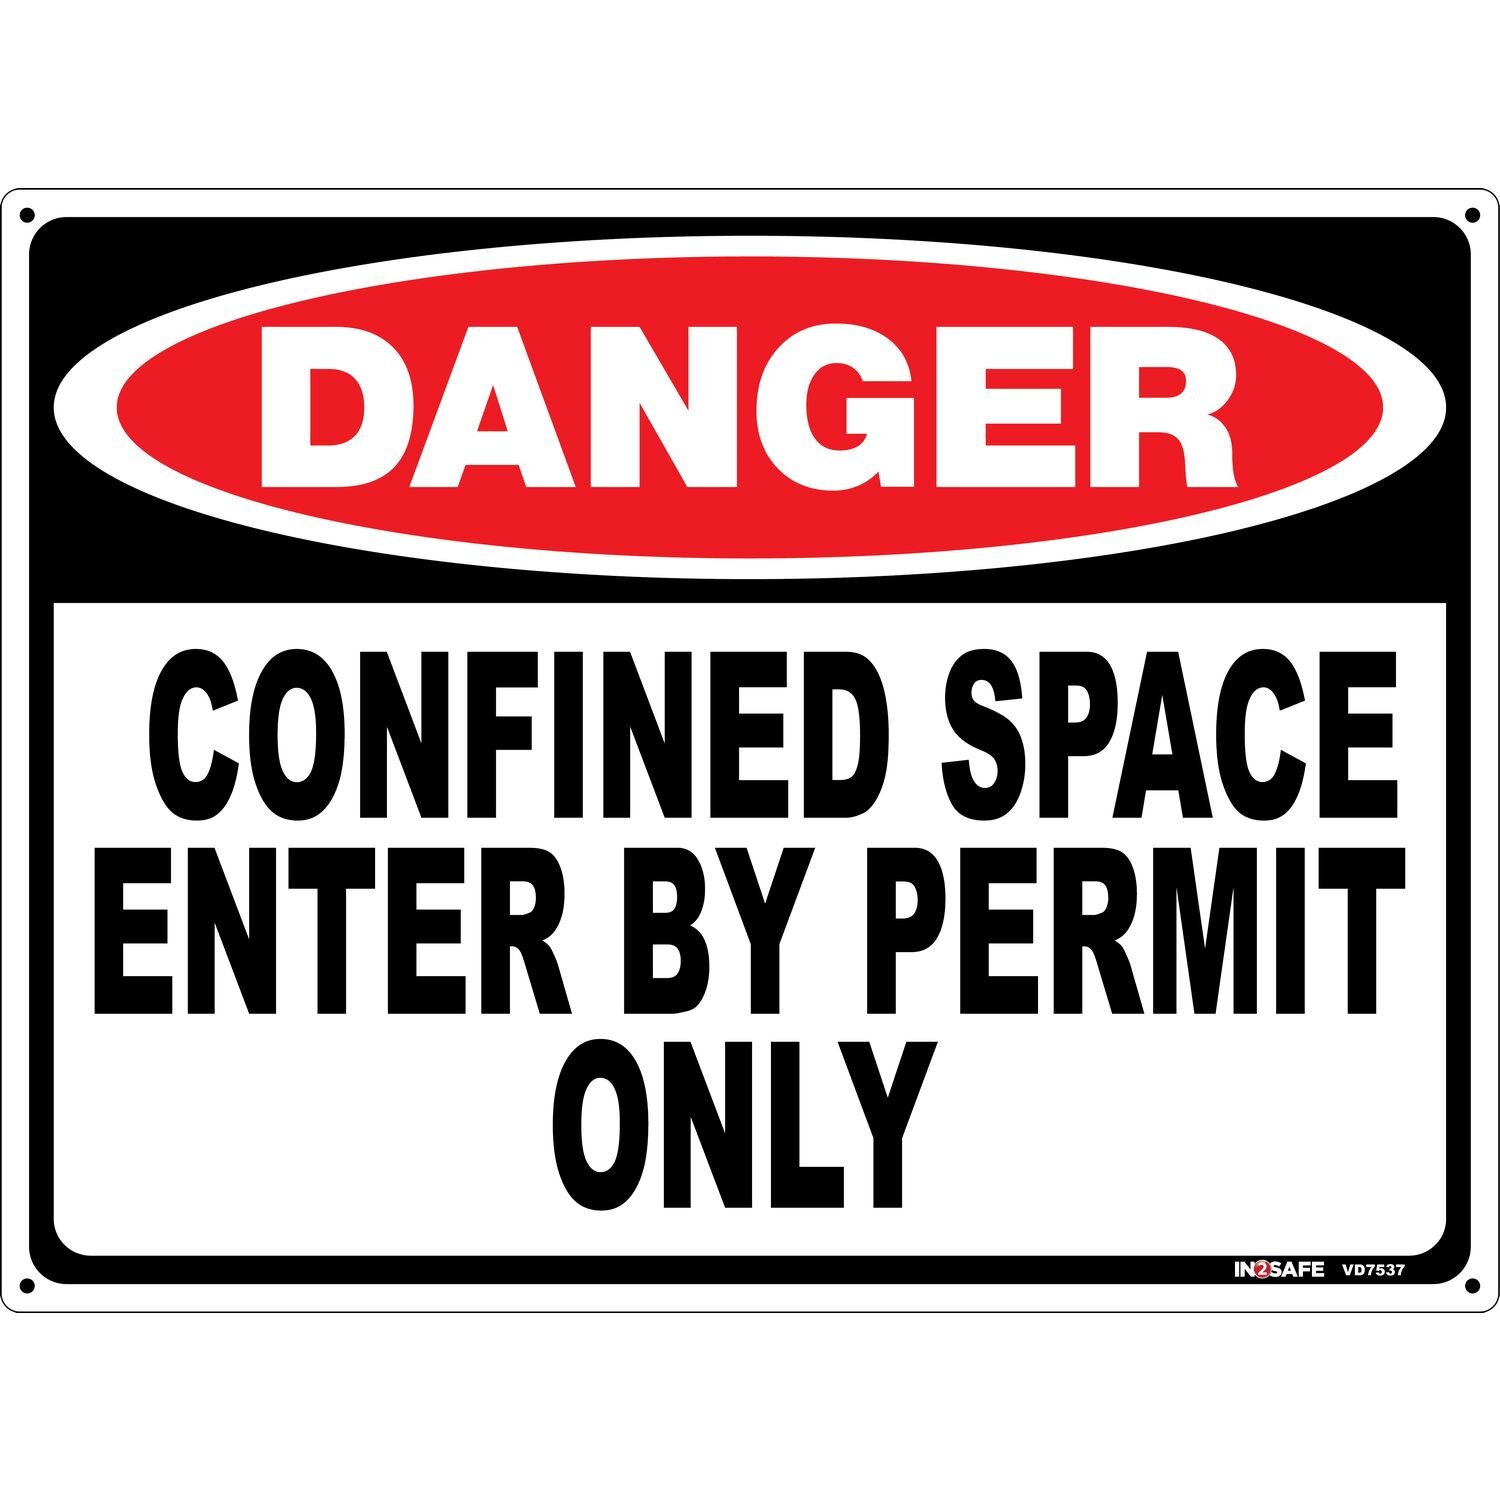 DANGER Confined Space Enter By Permit Only